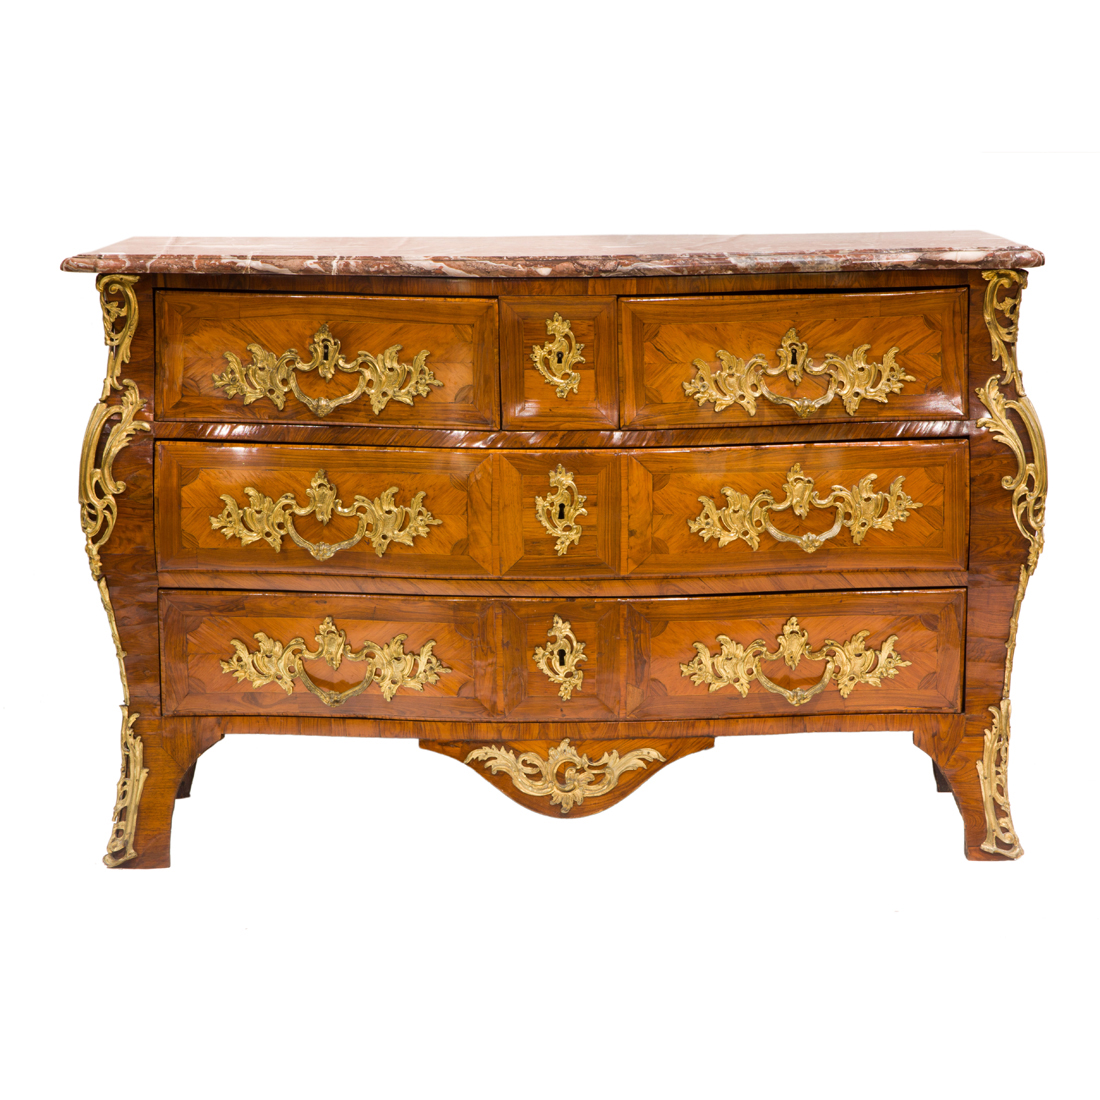 A FRENCH ORMOLU MOUNTED REGENCE 2d2a74